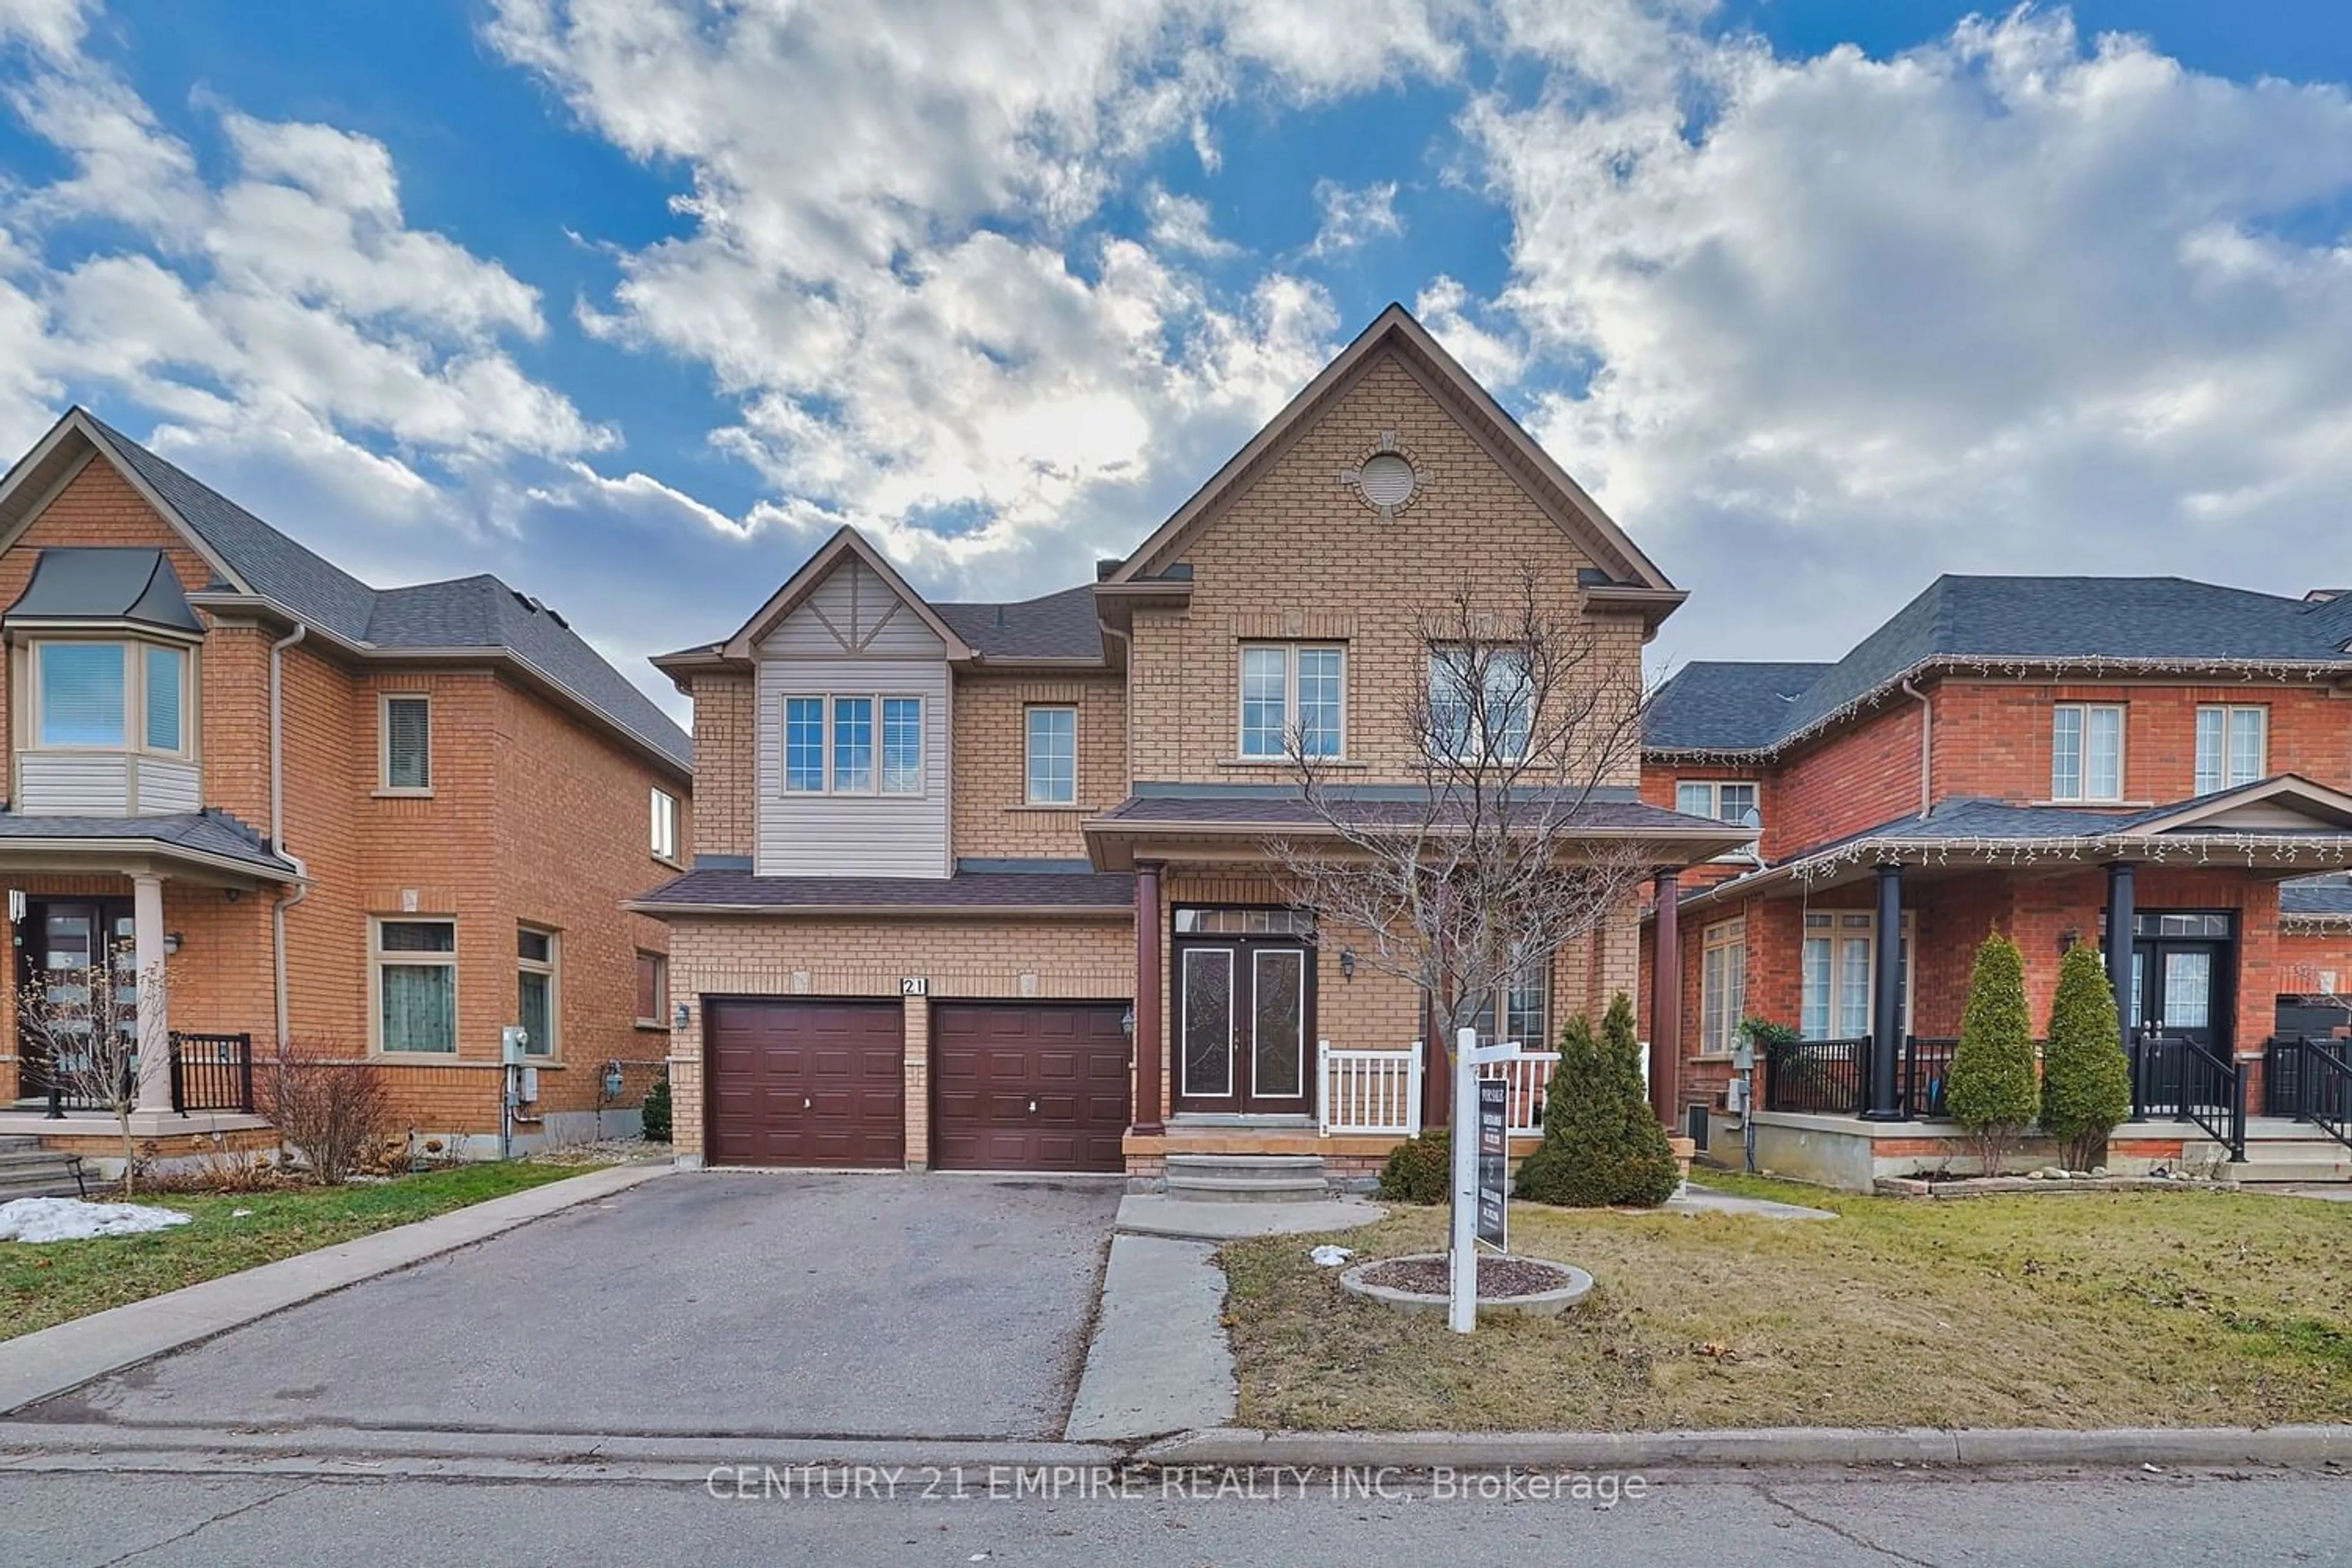 Home with brick exterior material for 21 Castle Mountain Dr, Brampton Ontario L6R 2W9